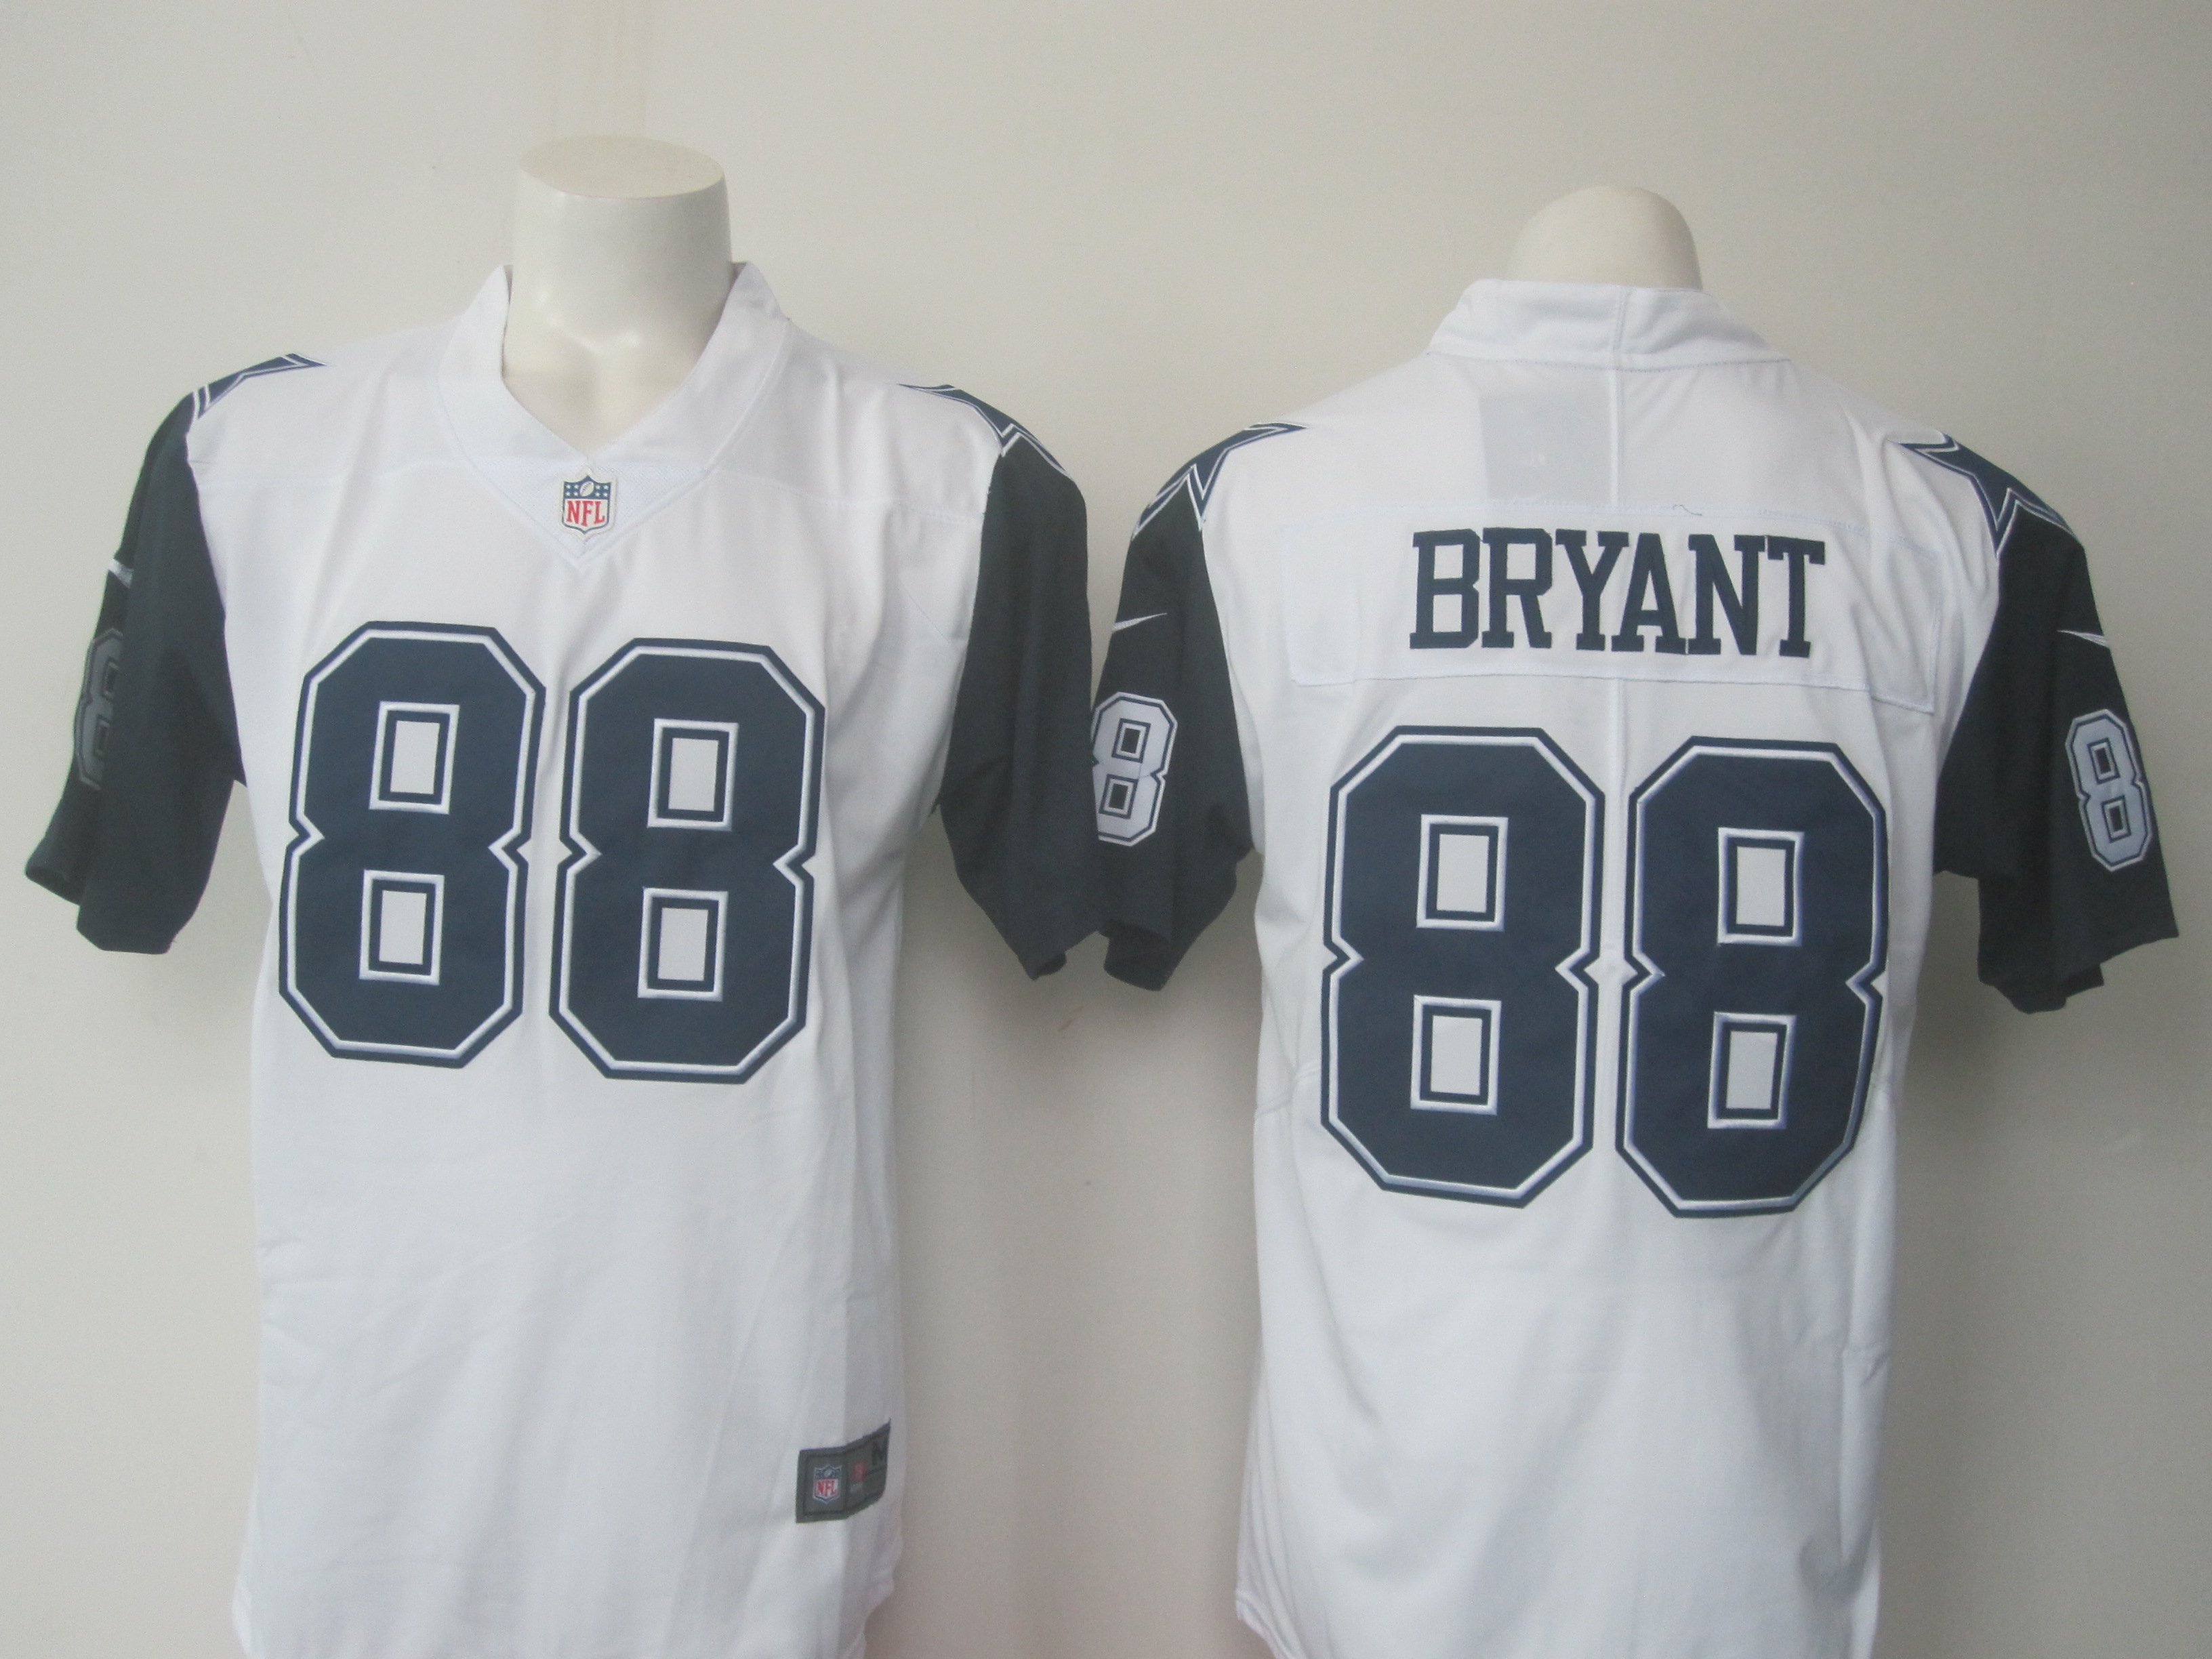 Men's Nike Cowboys #88 Dez Bryant White Limited Rush Stitched NFL Jersey